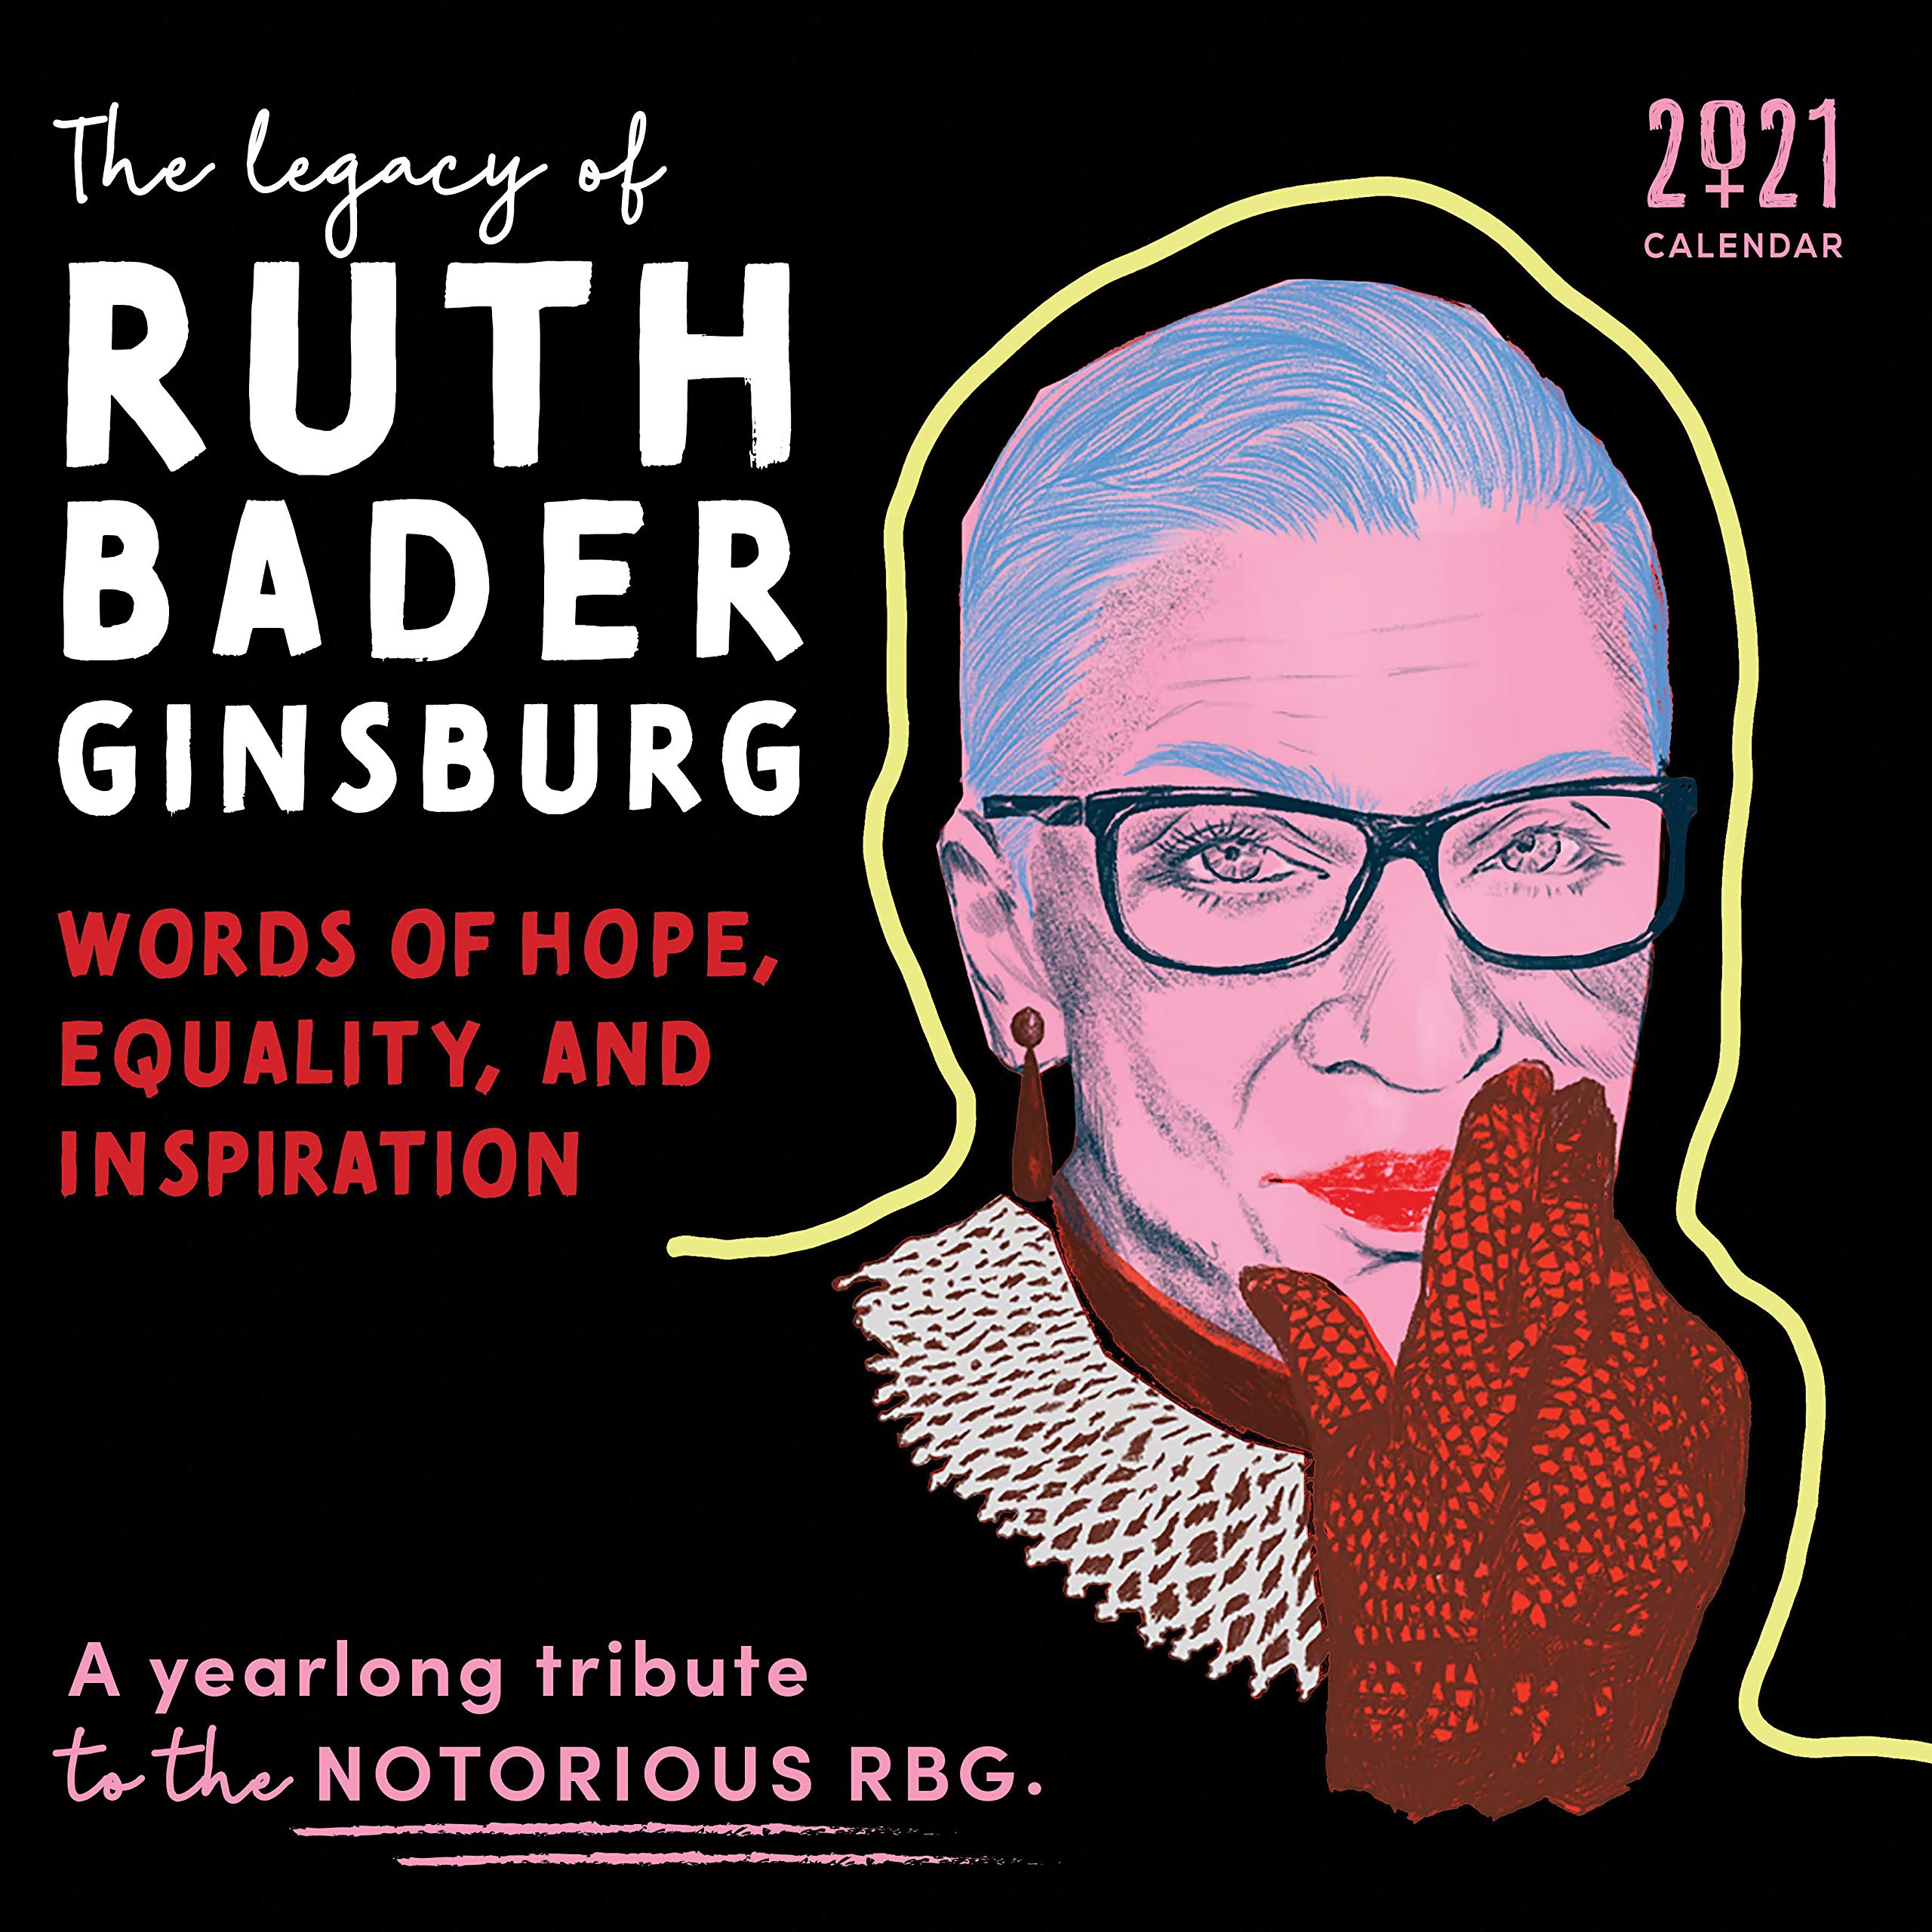 the-legacy-of-ruth-bader-ginsburg-wall-calendar-her-words-of-hope-equality-and-inspiration-a